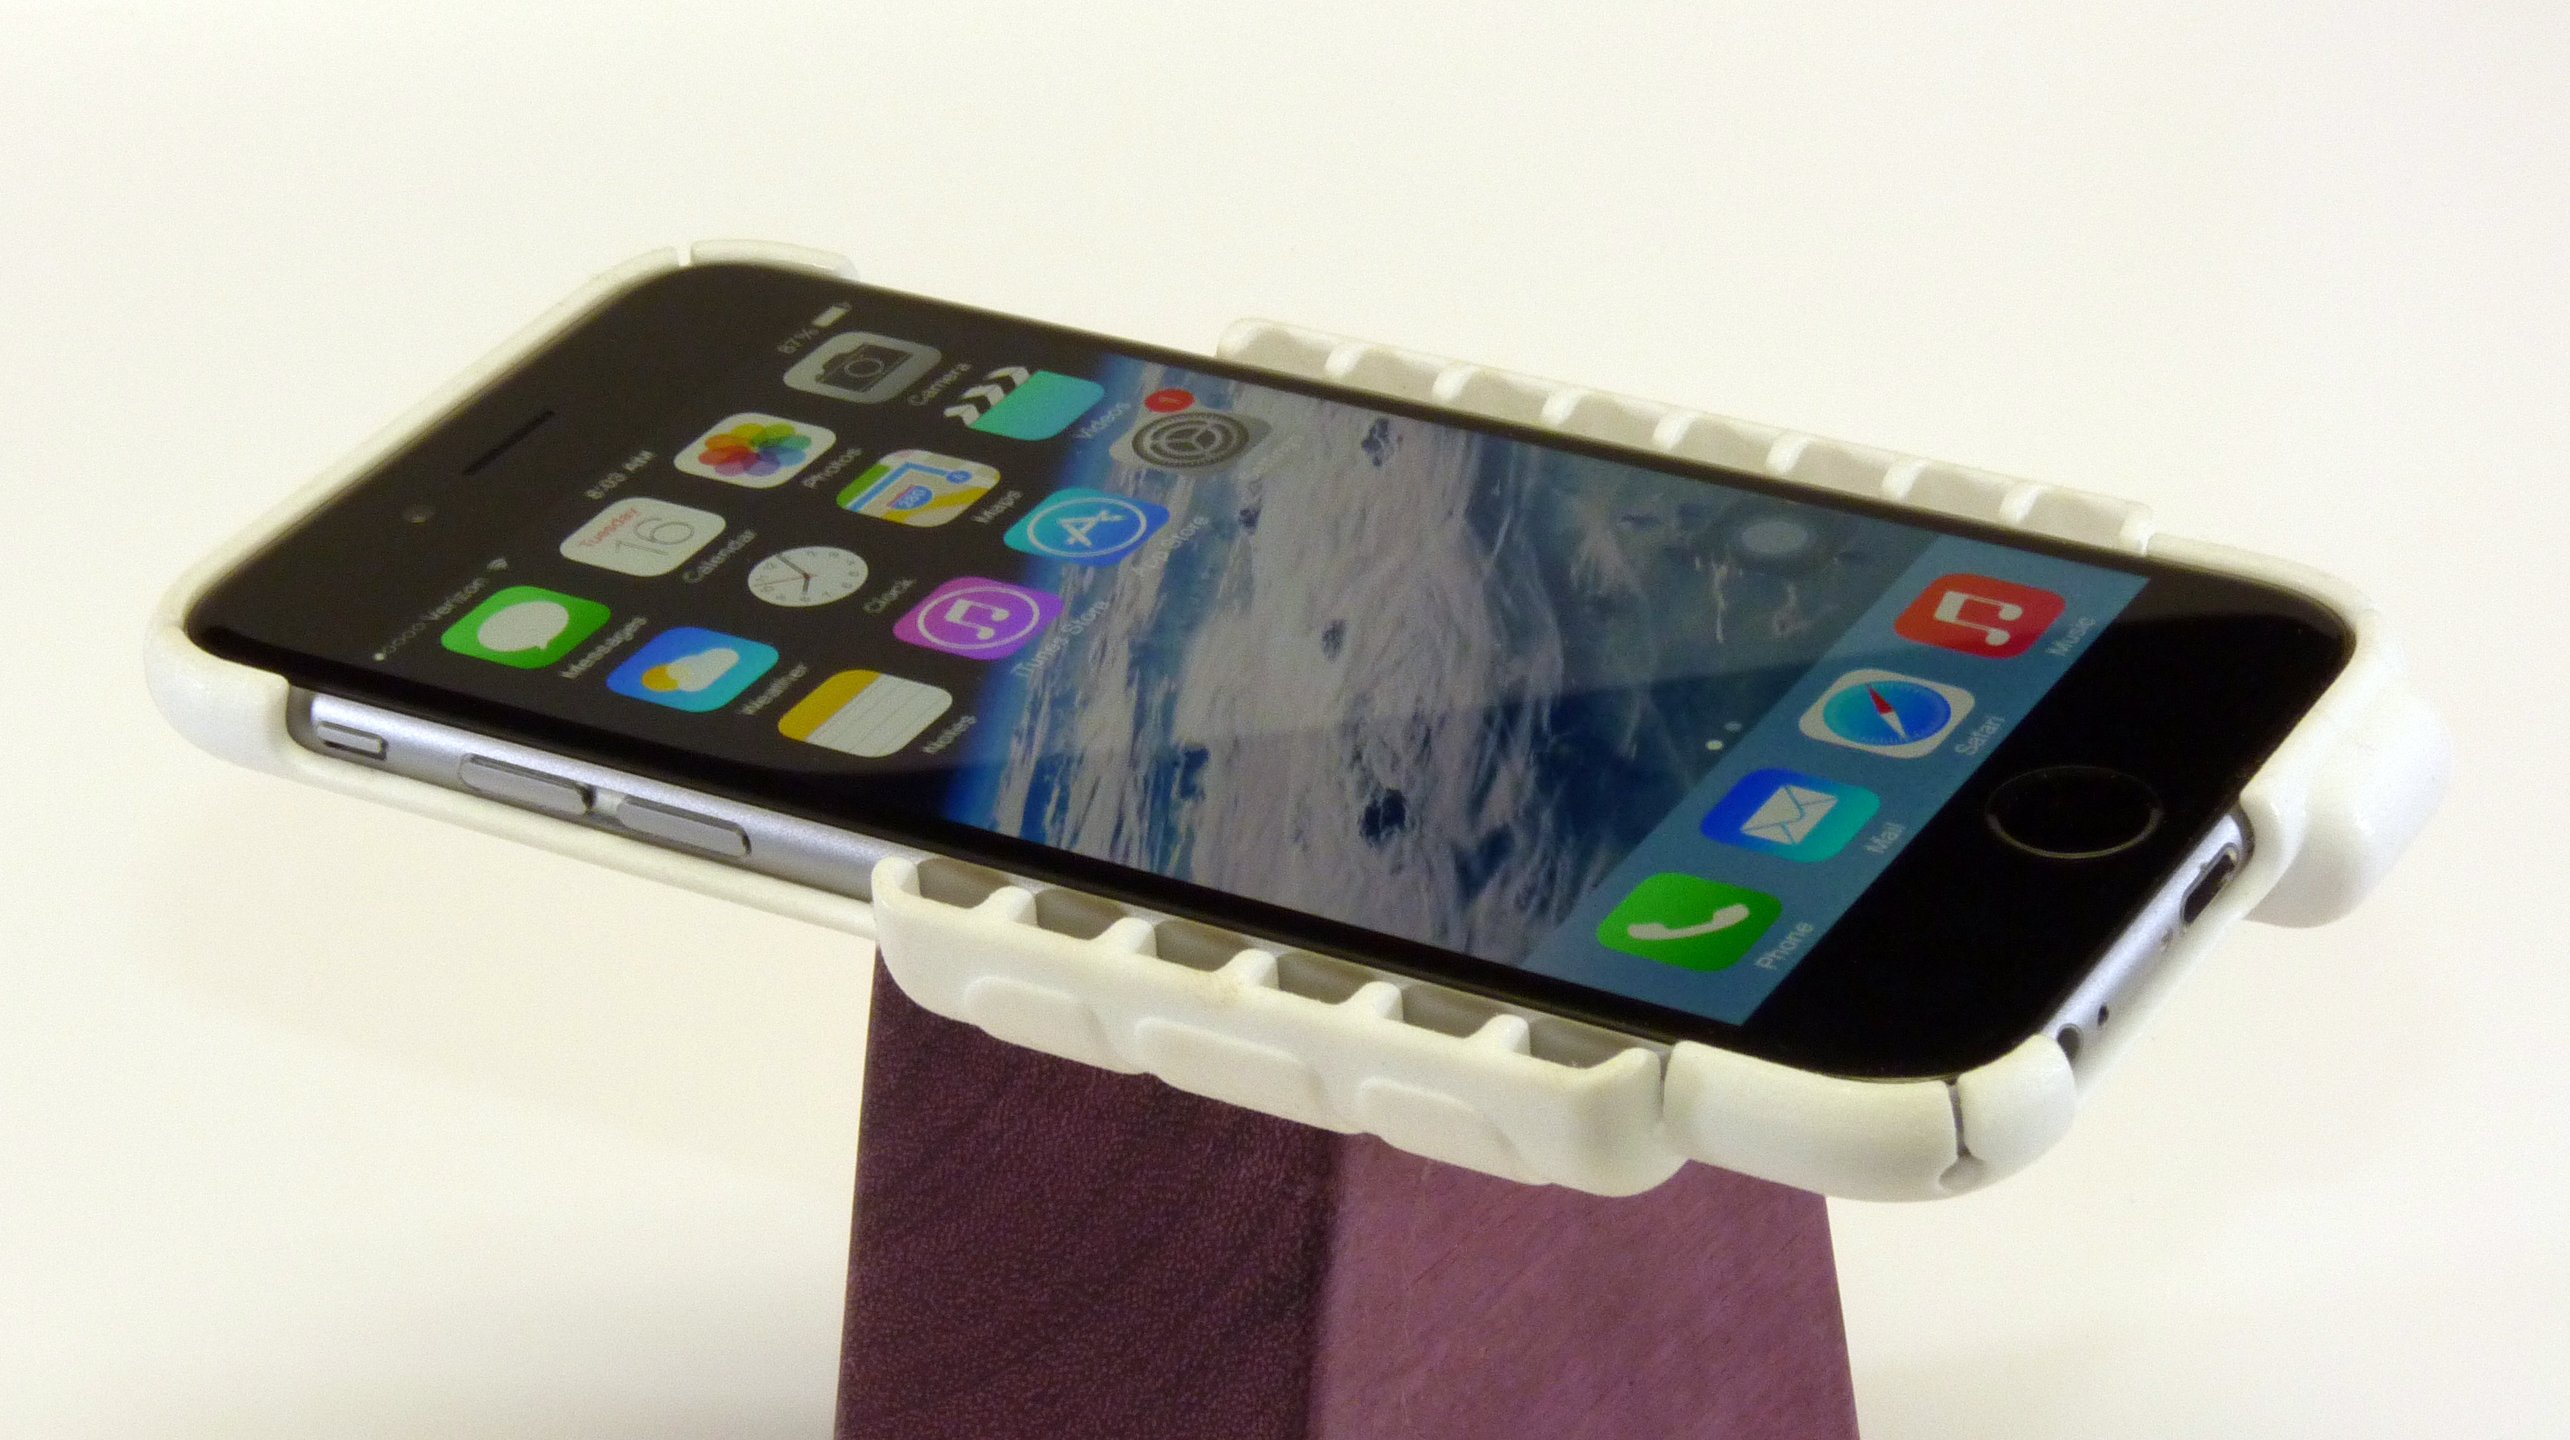 Amplifying Christmas tunes with this 3D printed iPhone case